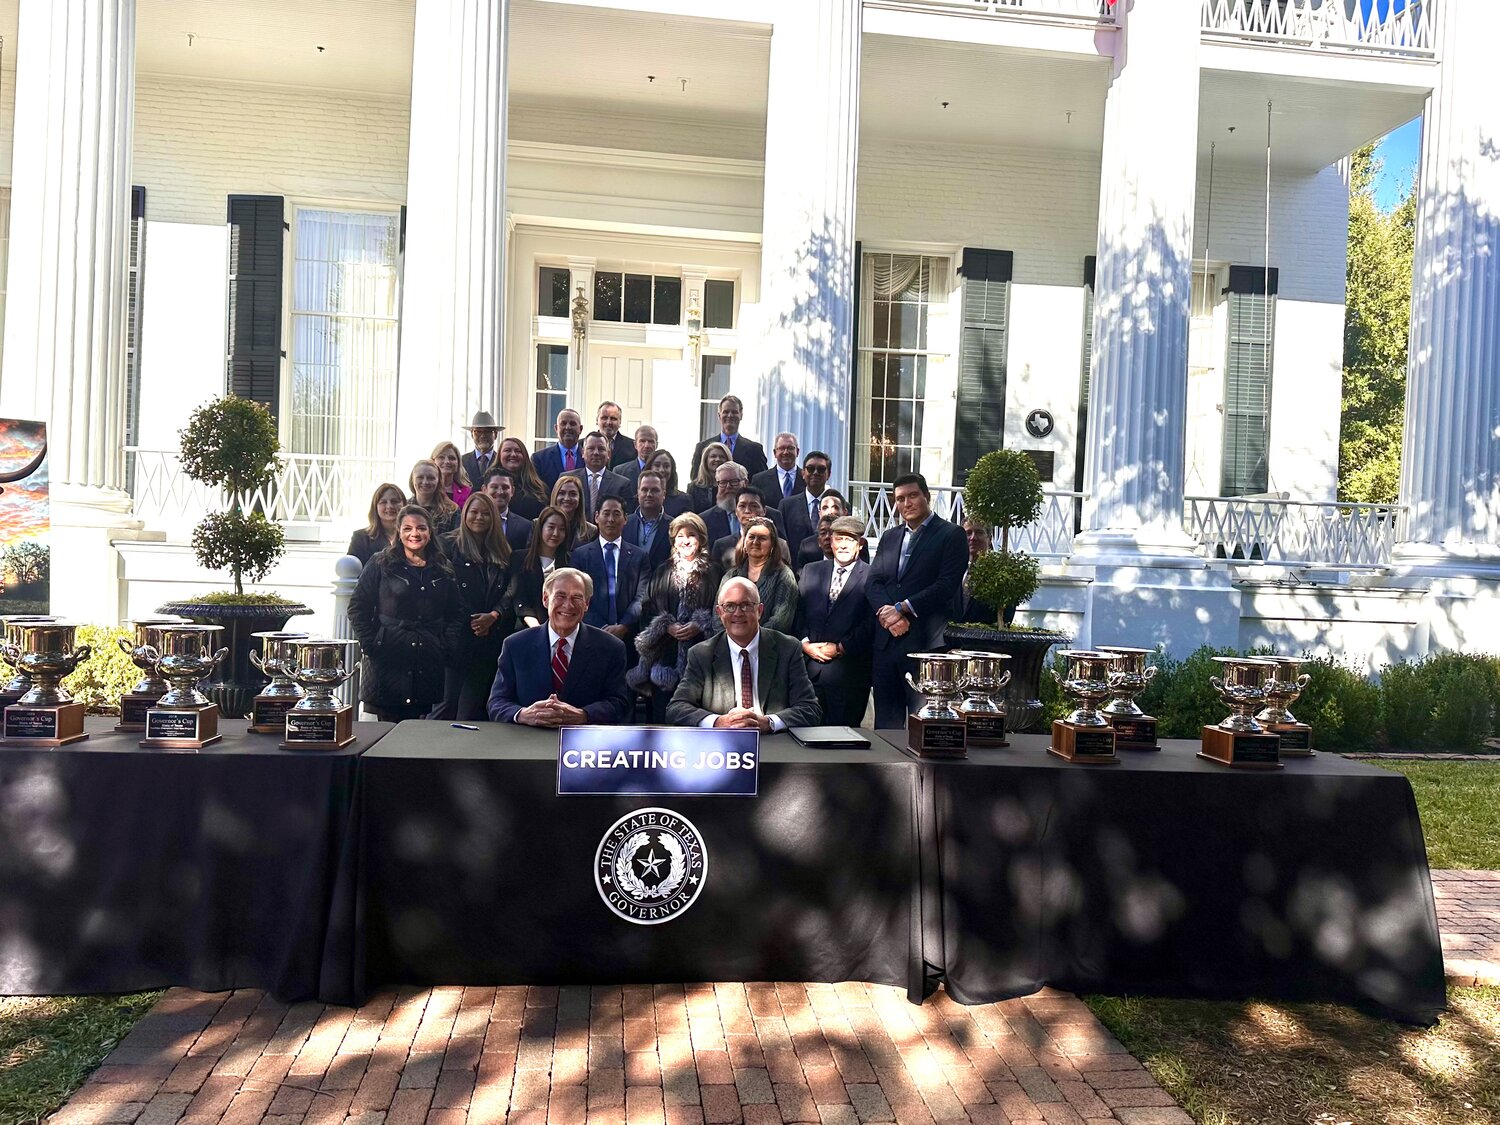 Economic developers from around the state gather with Governor Gregg Abbott for the Governor's Cup presentation in Austin on November 1st. Front row far right, Elin CEO Ercan Kalafat and WCEDP Executive Director Vince Yokom.